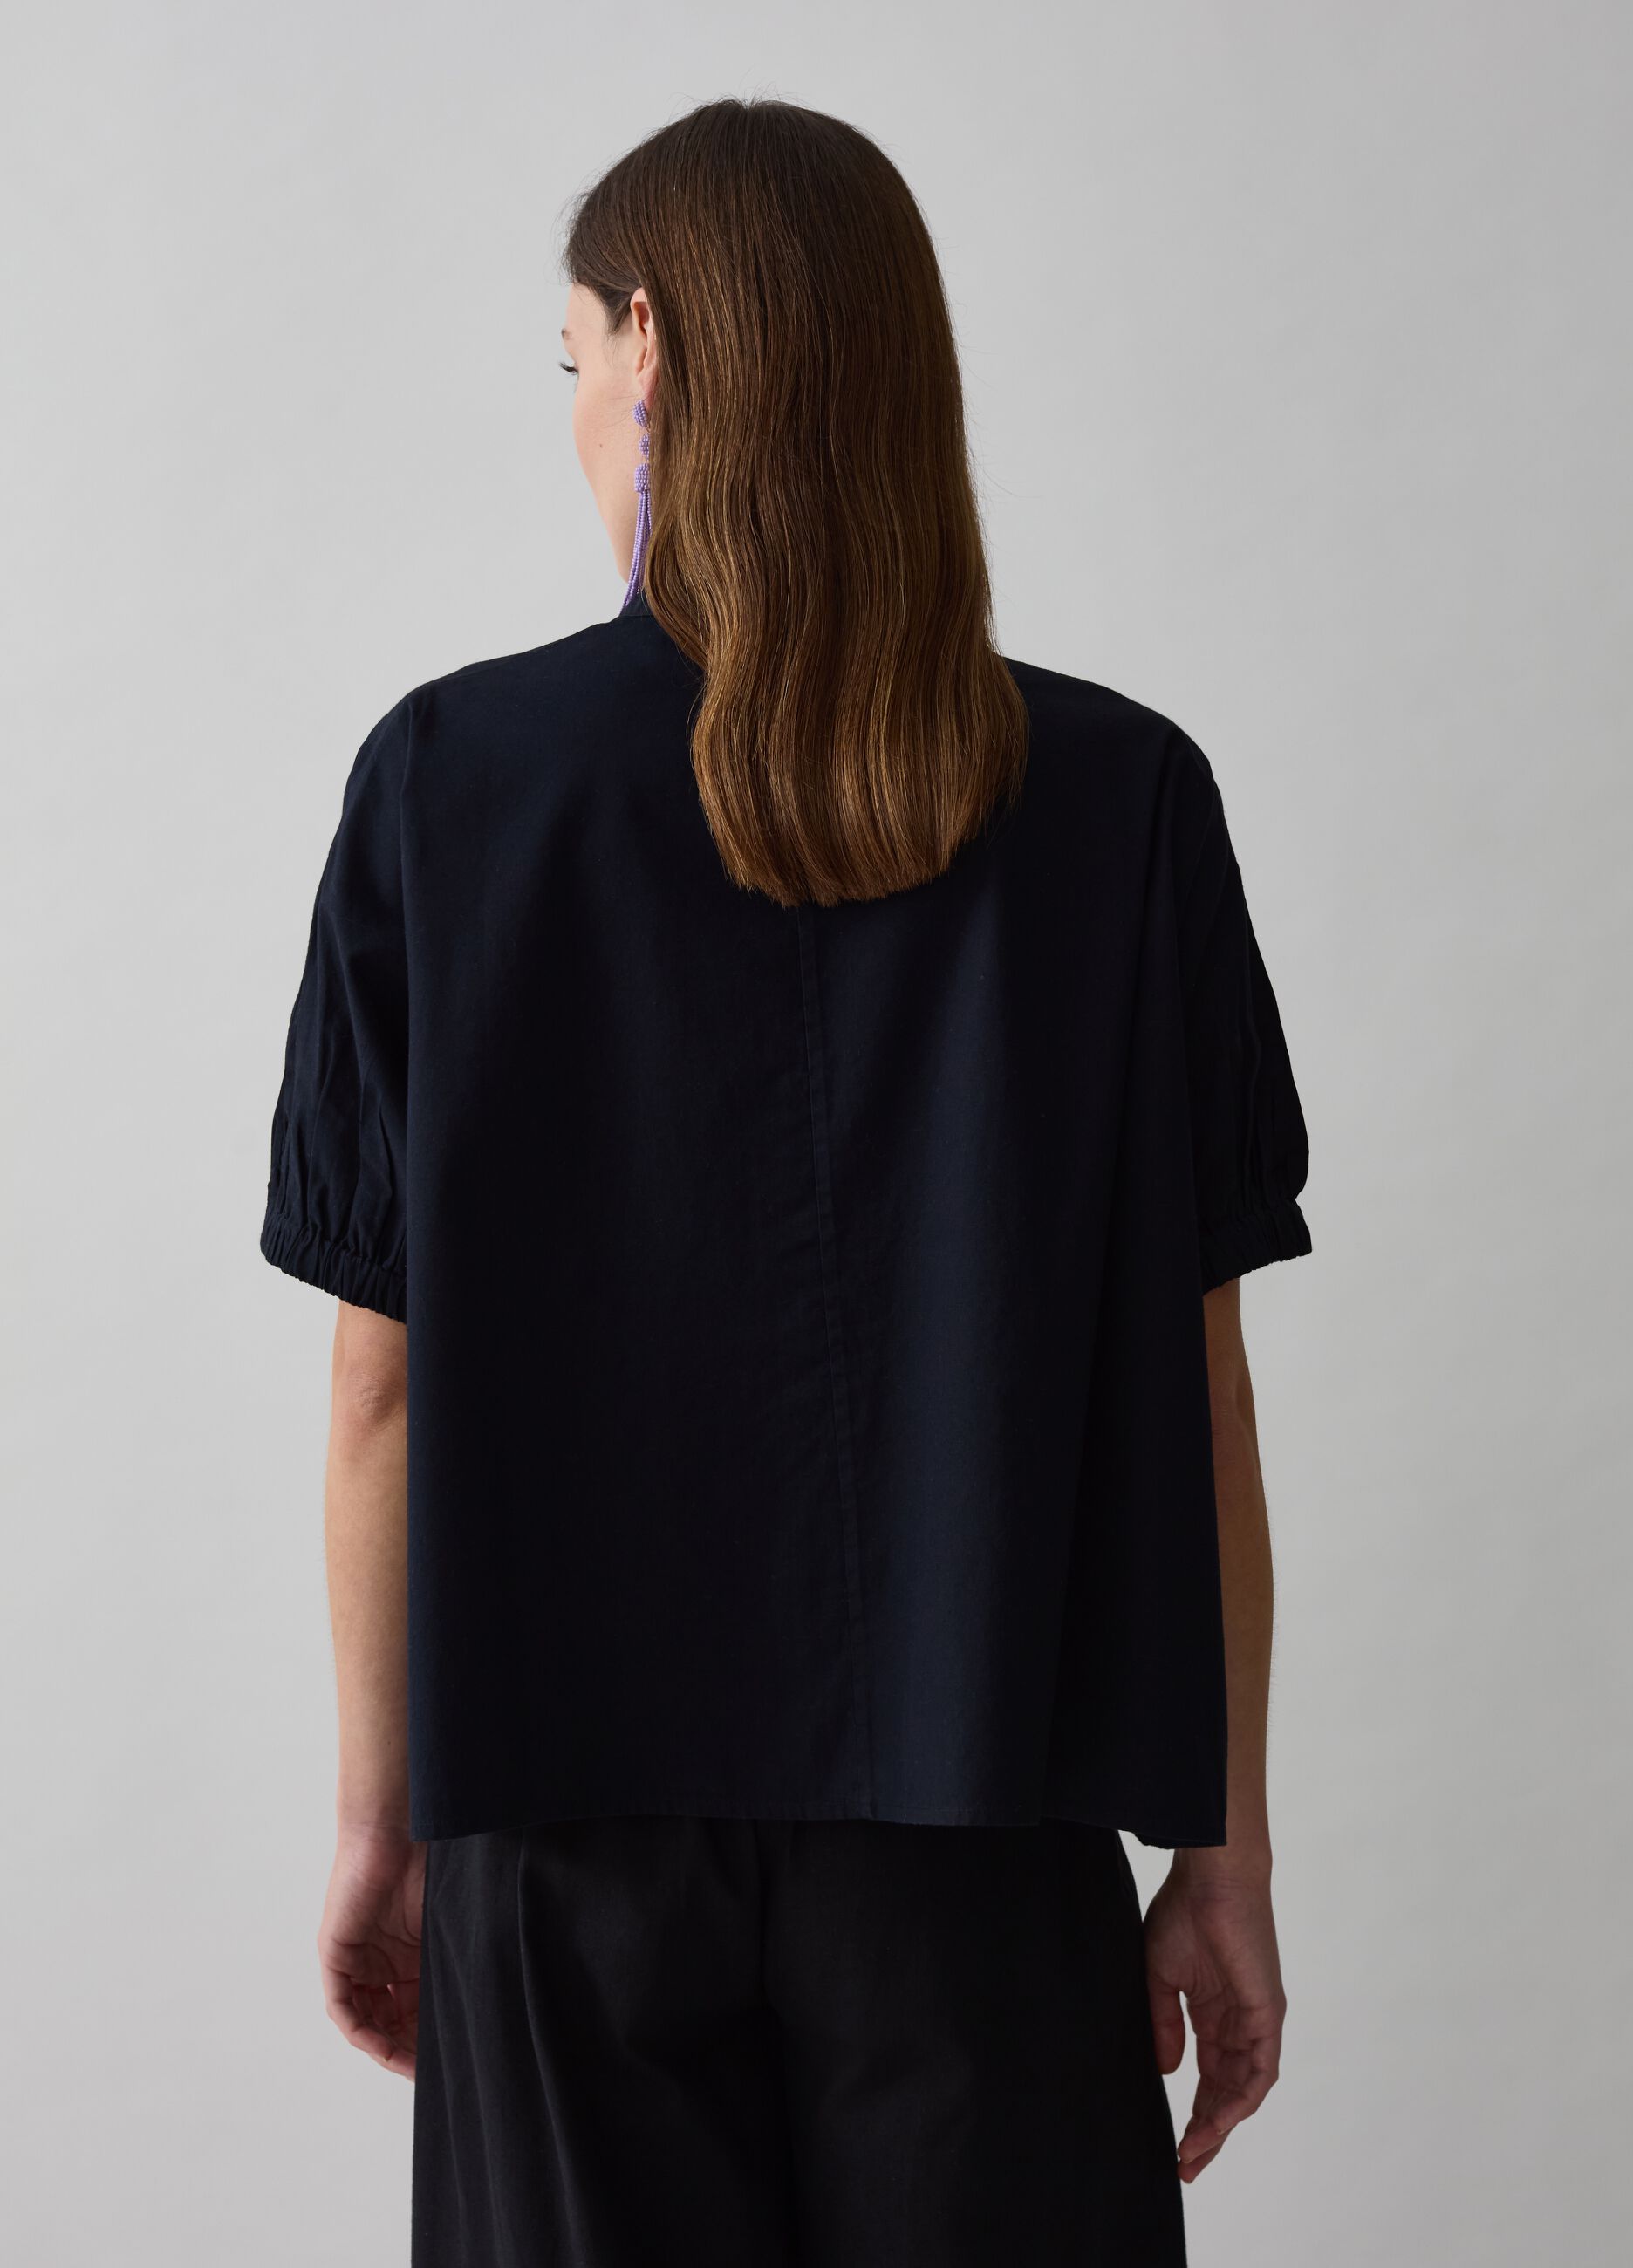 Poplin blouse with puff sleeves